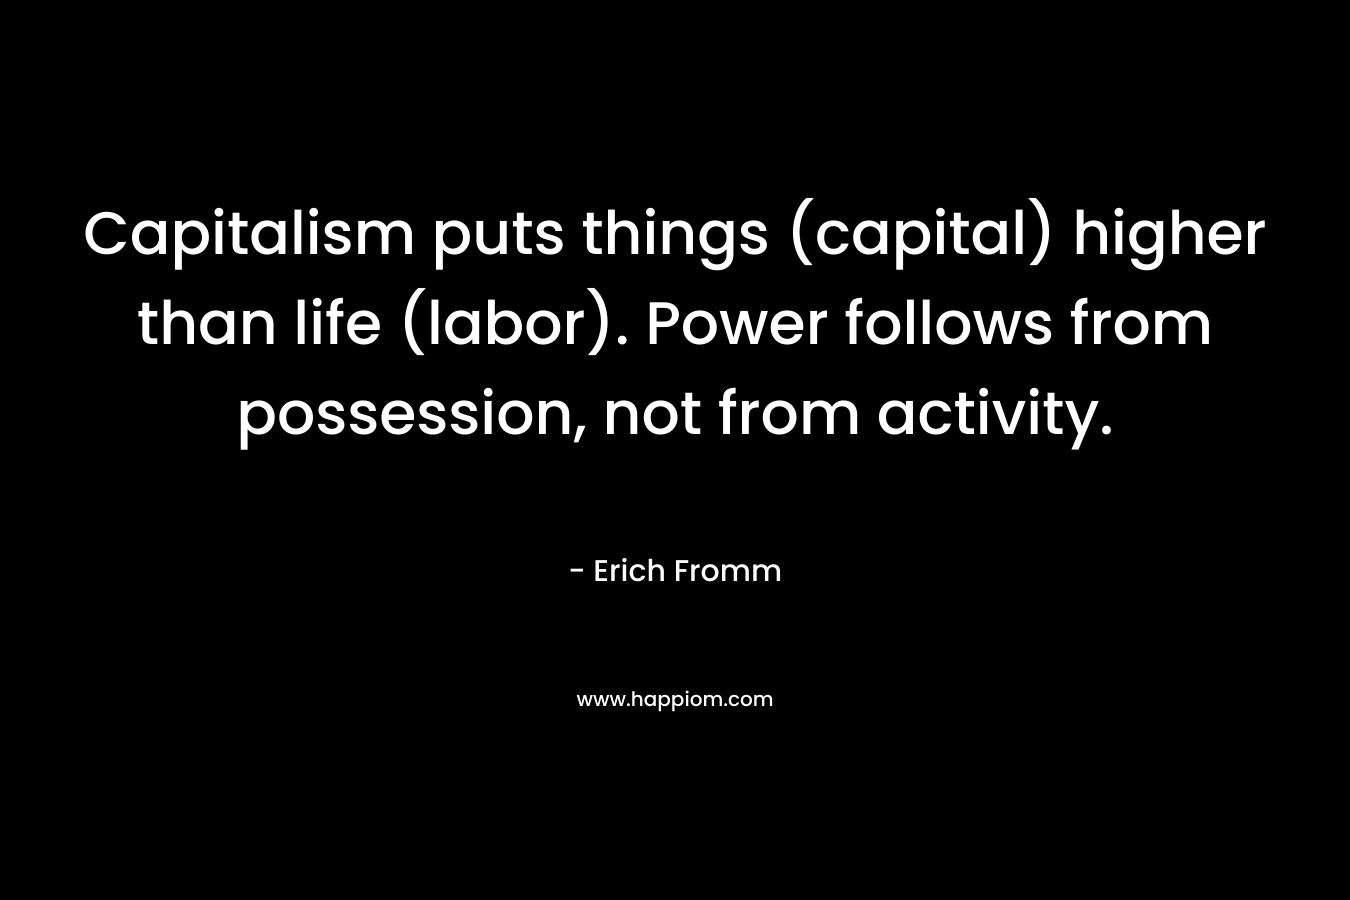 Capitalism puts things (capital) higher than life (labor). Power follows from possession, not from activity. – Erich Fromm